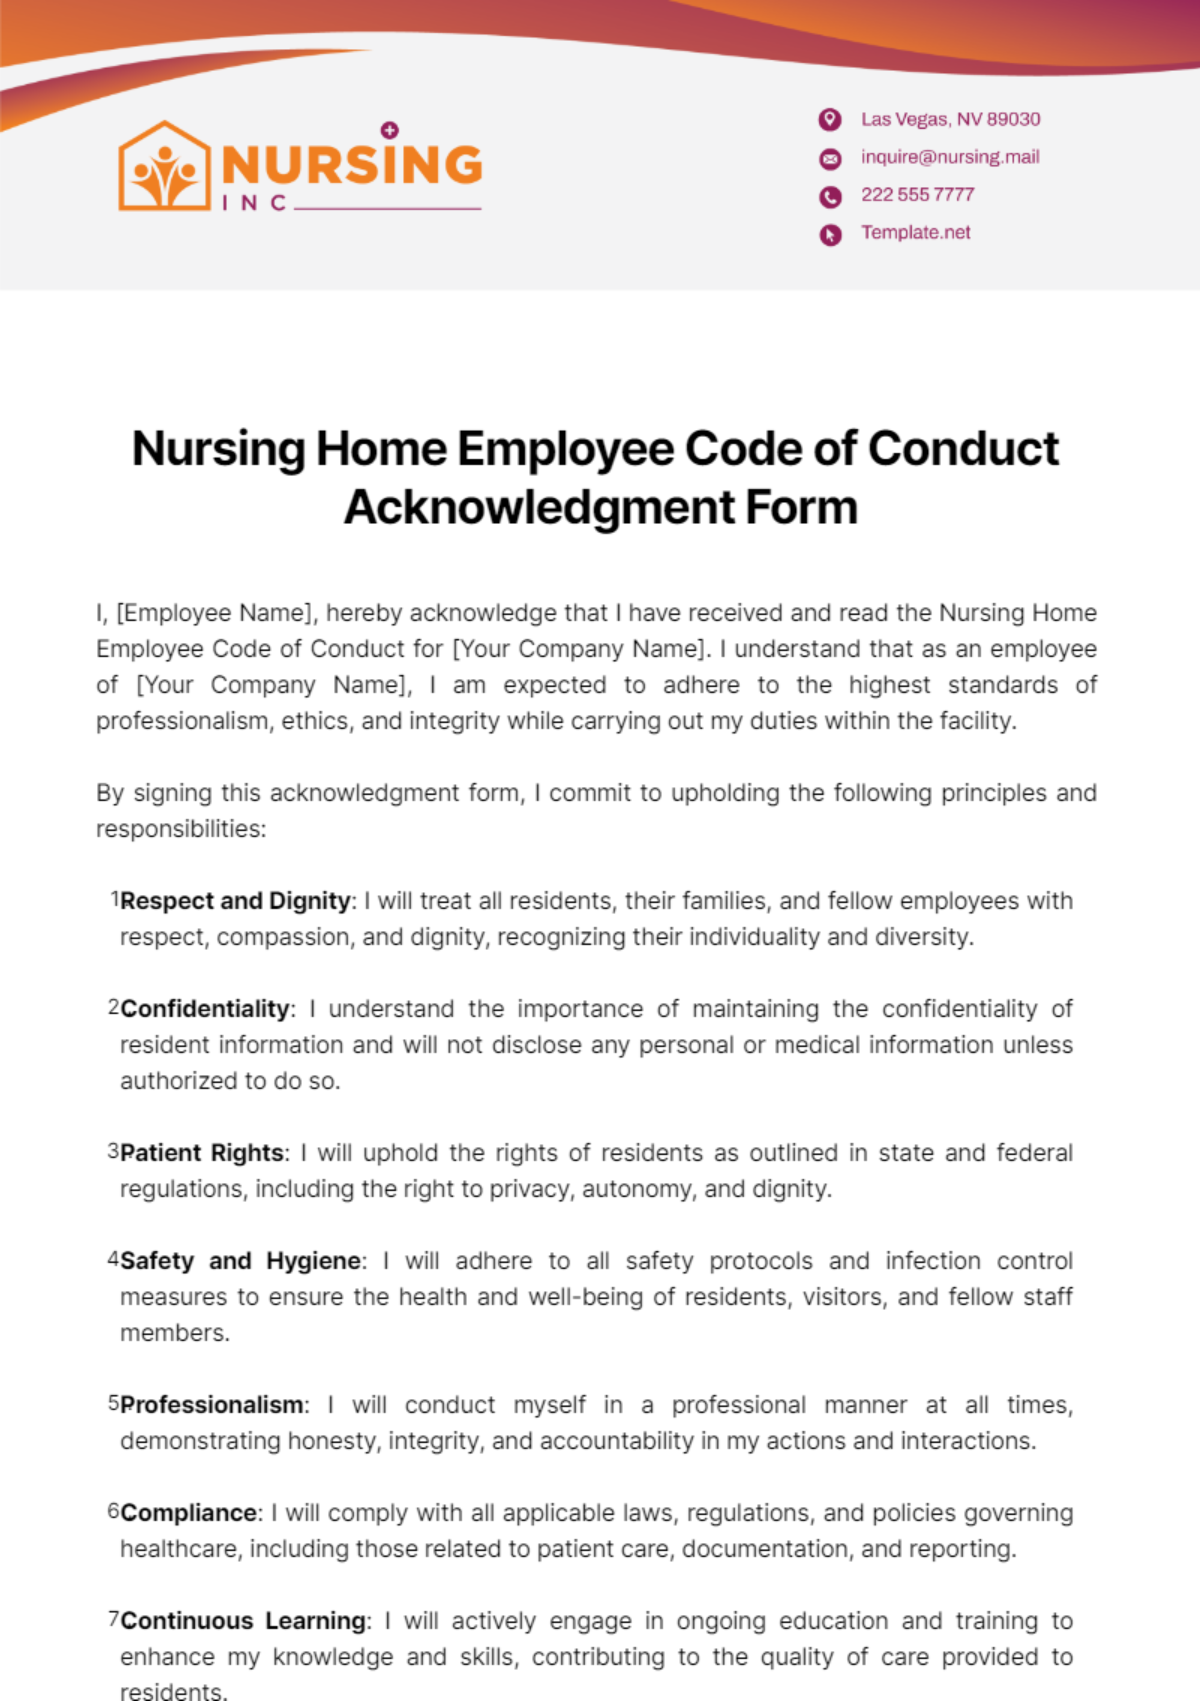 Nursing Home Employee Code of Conduct Acknowledgment Form Template